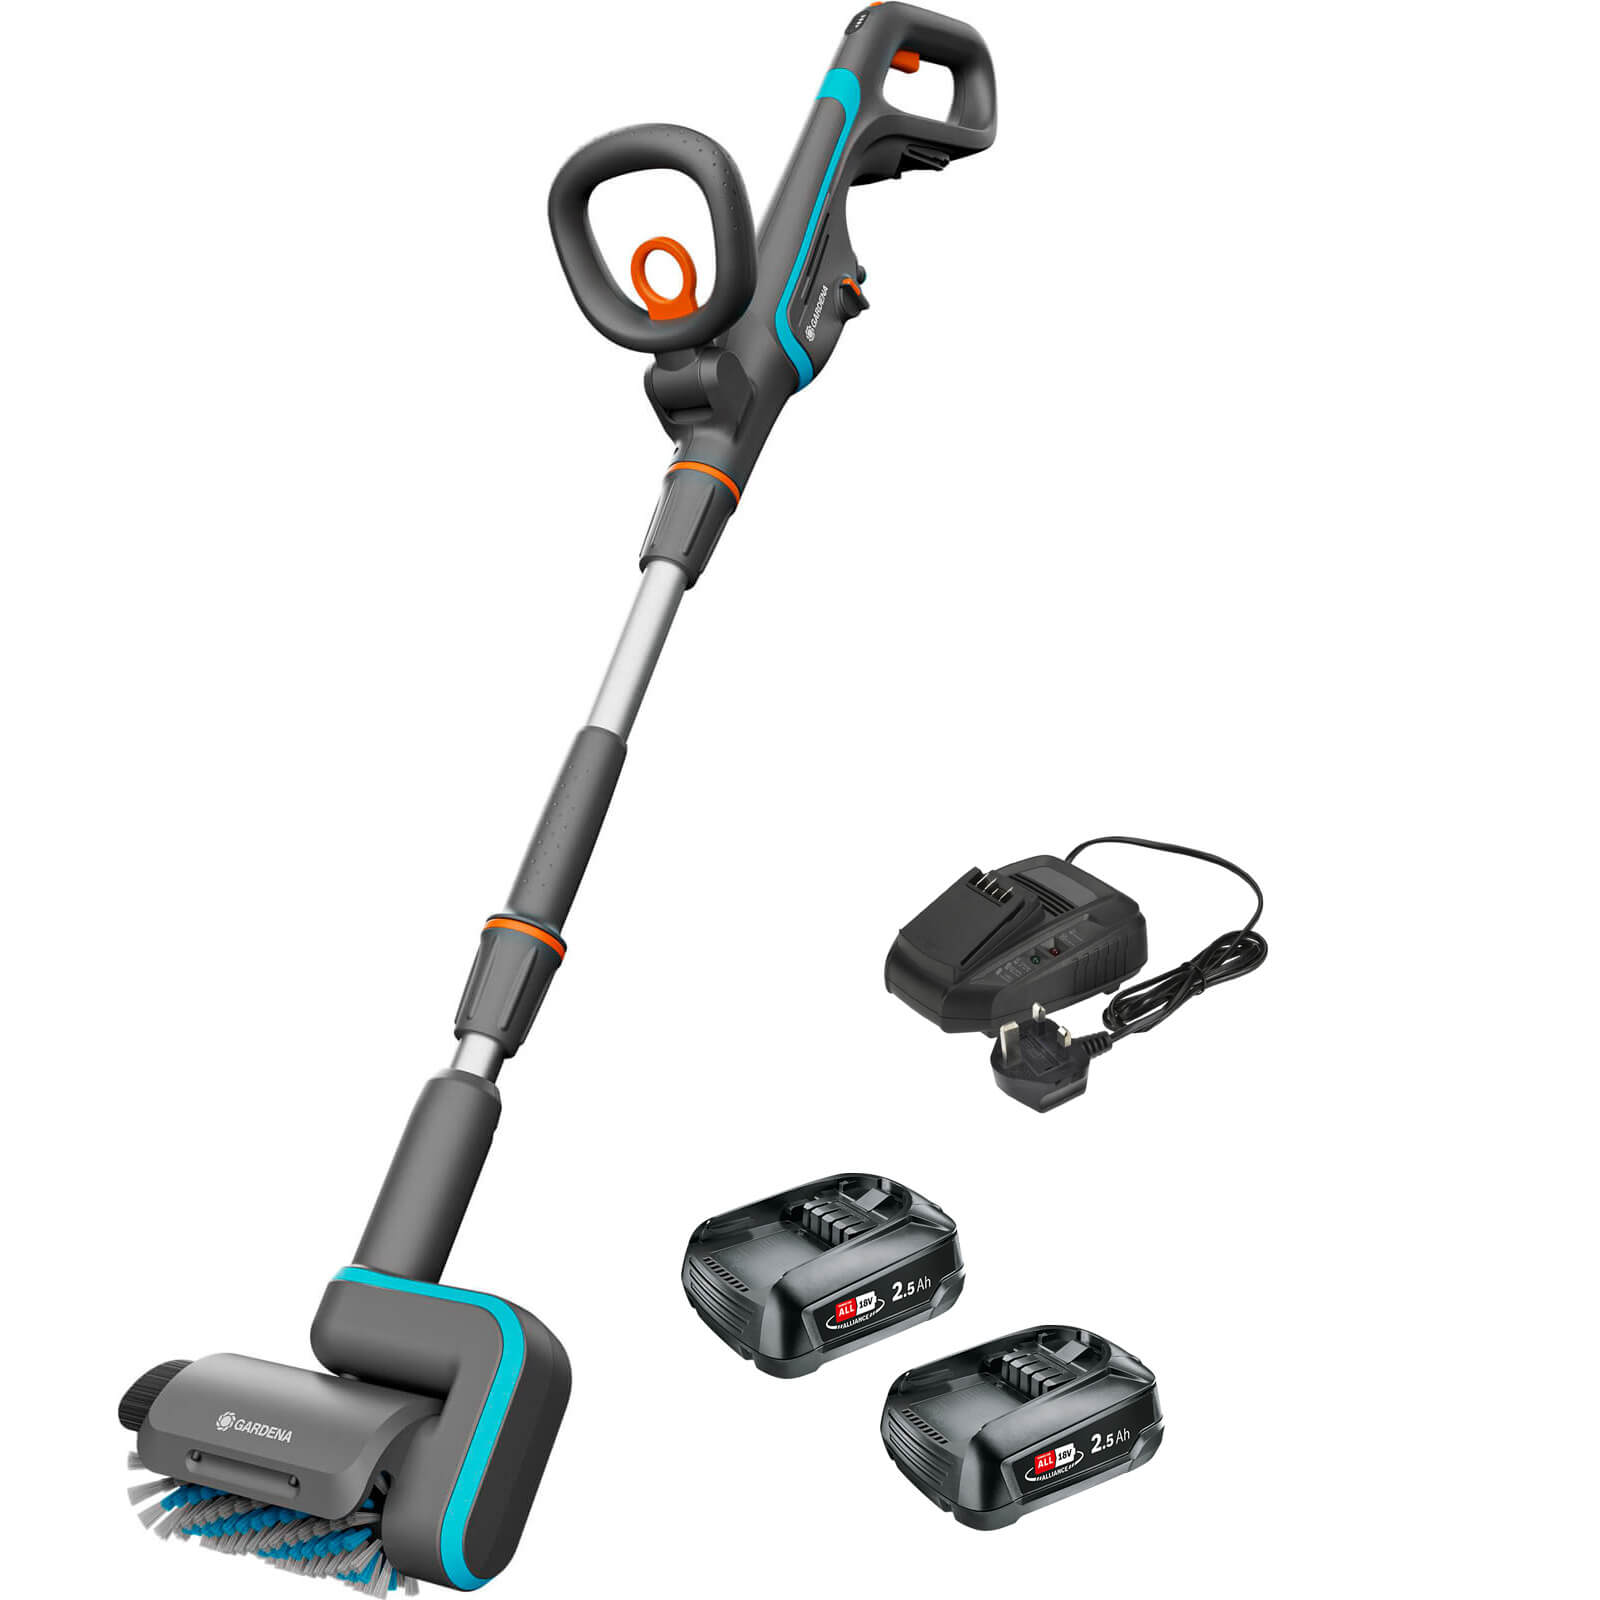 Gardena AQUABRUSH P4A 18v Cordless Patio and Surface Cleaner 2 x 2.5ah Li-ion Charger